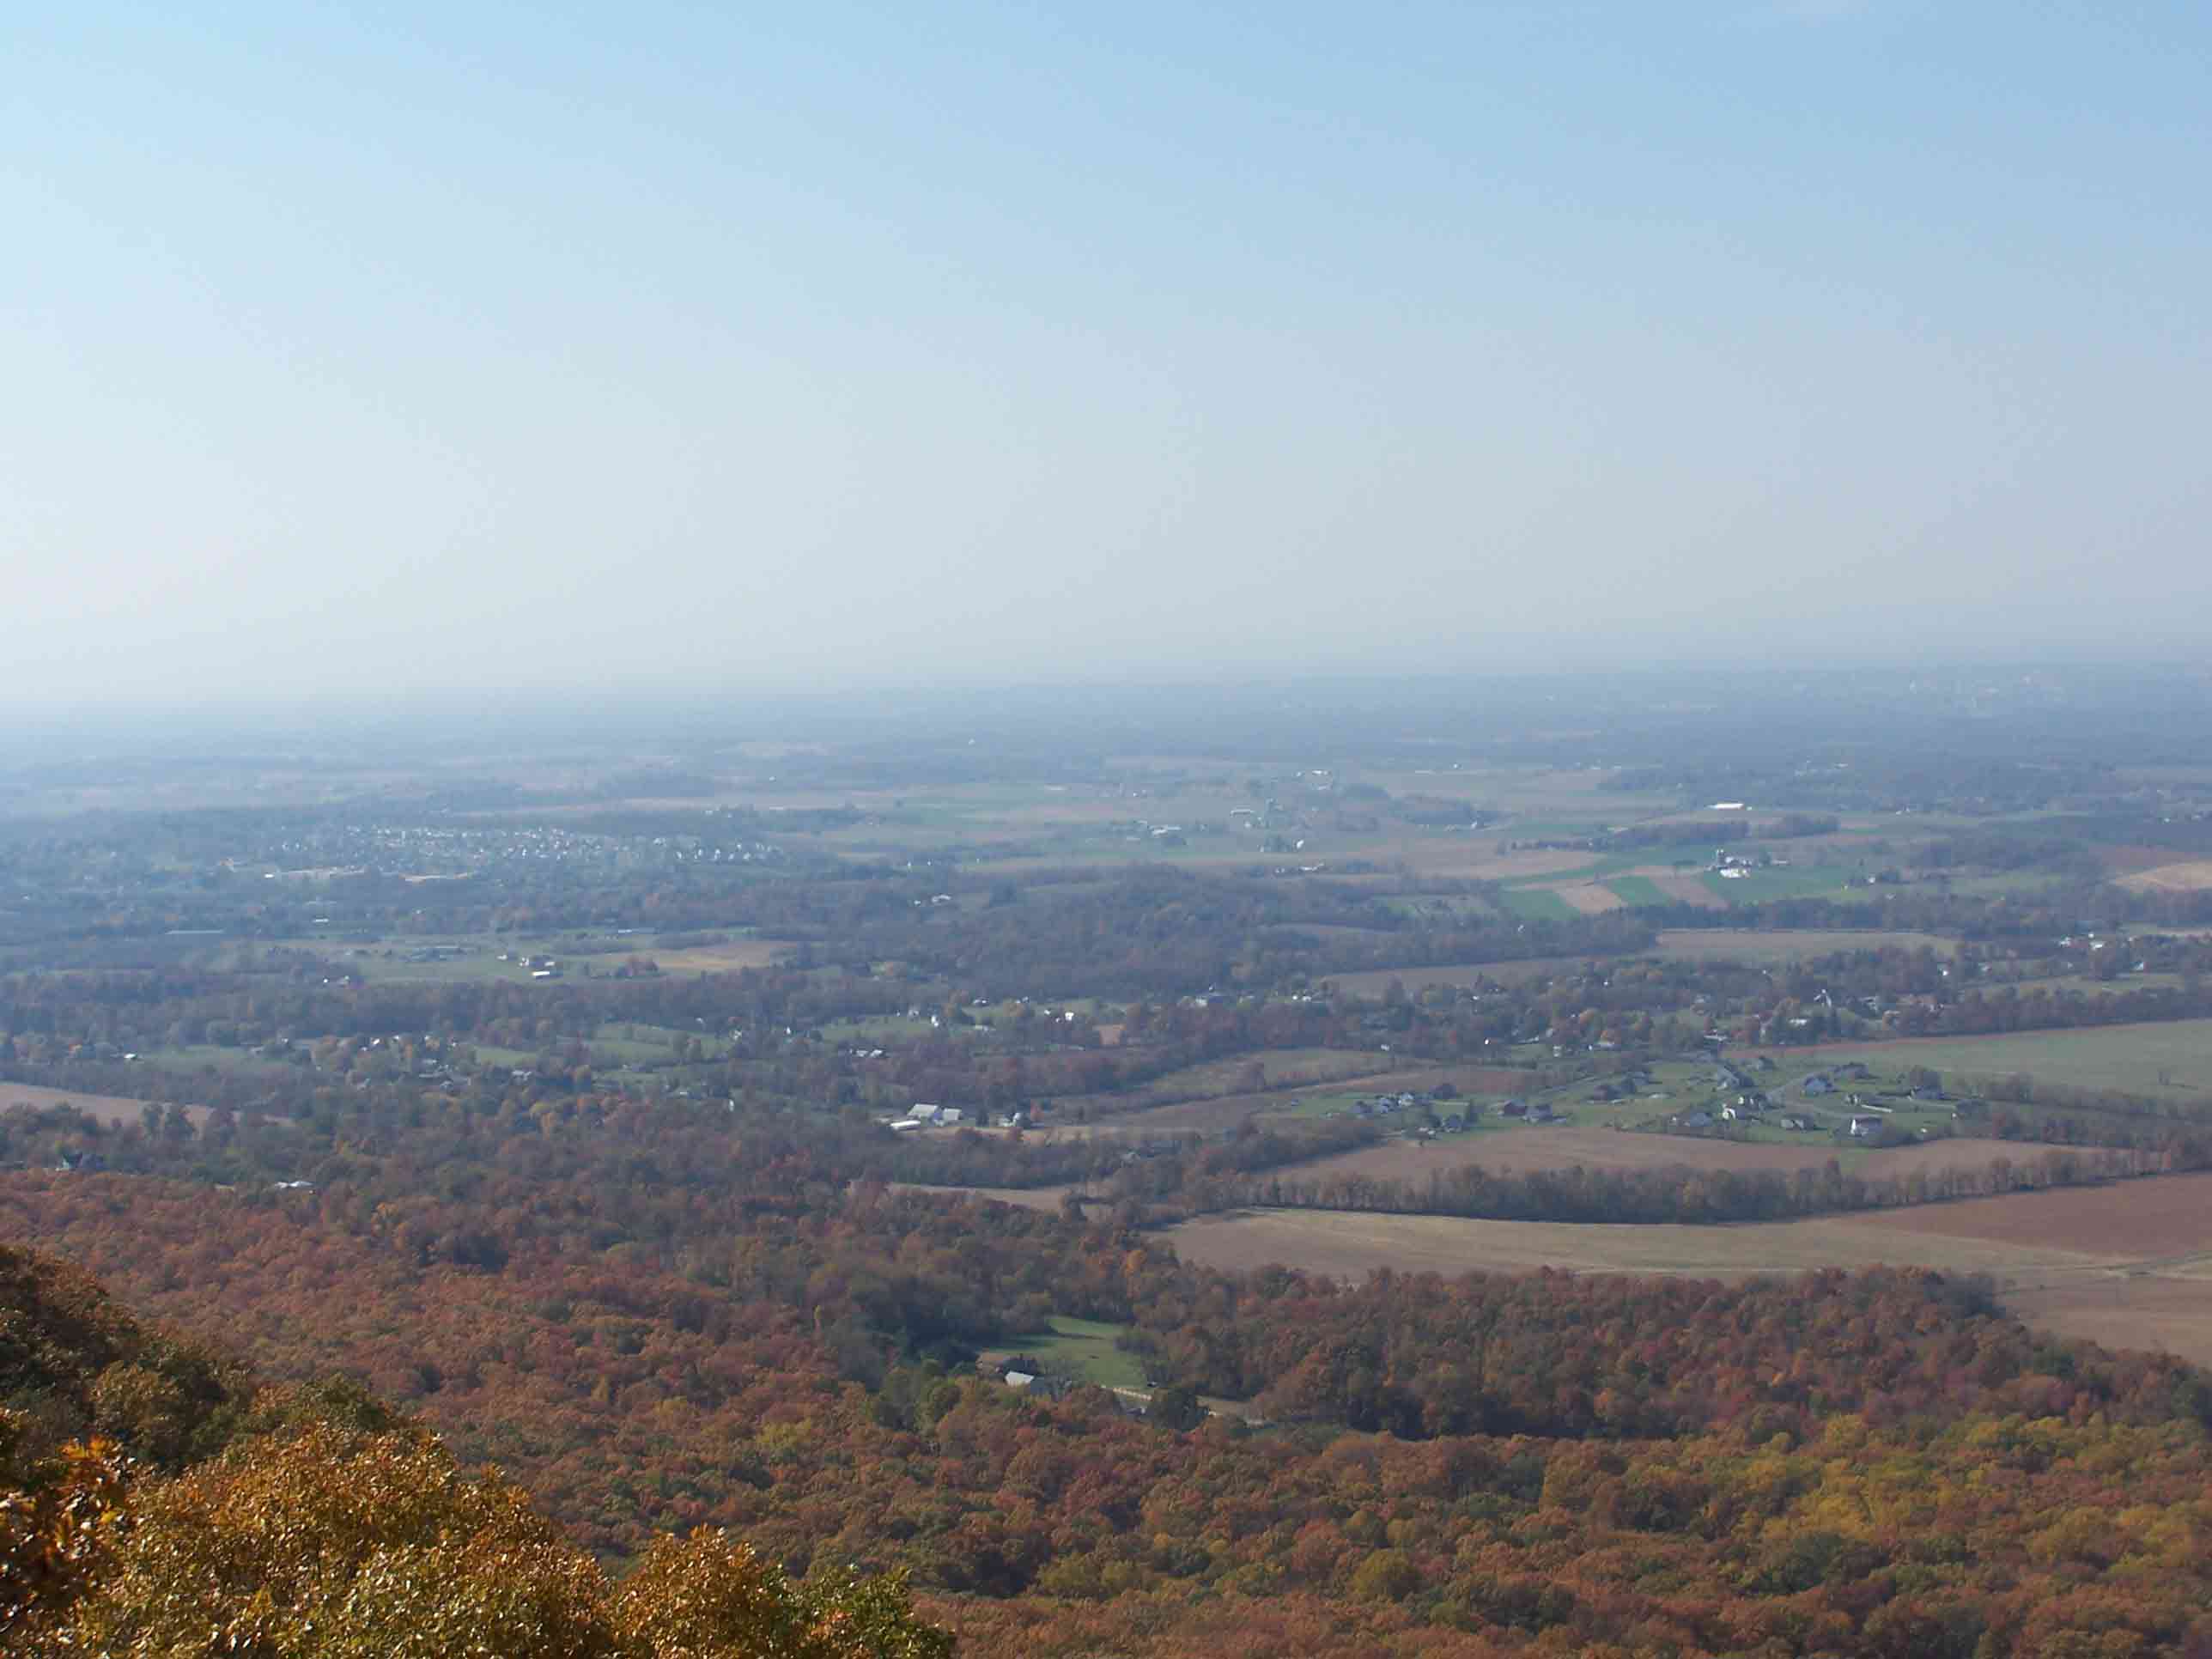 View from High Rock - blue-blazed loop trail. Courtesy at@rohland.org